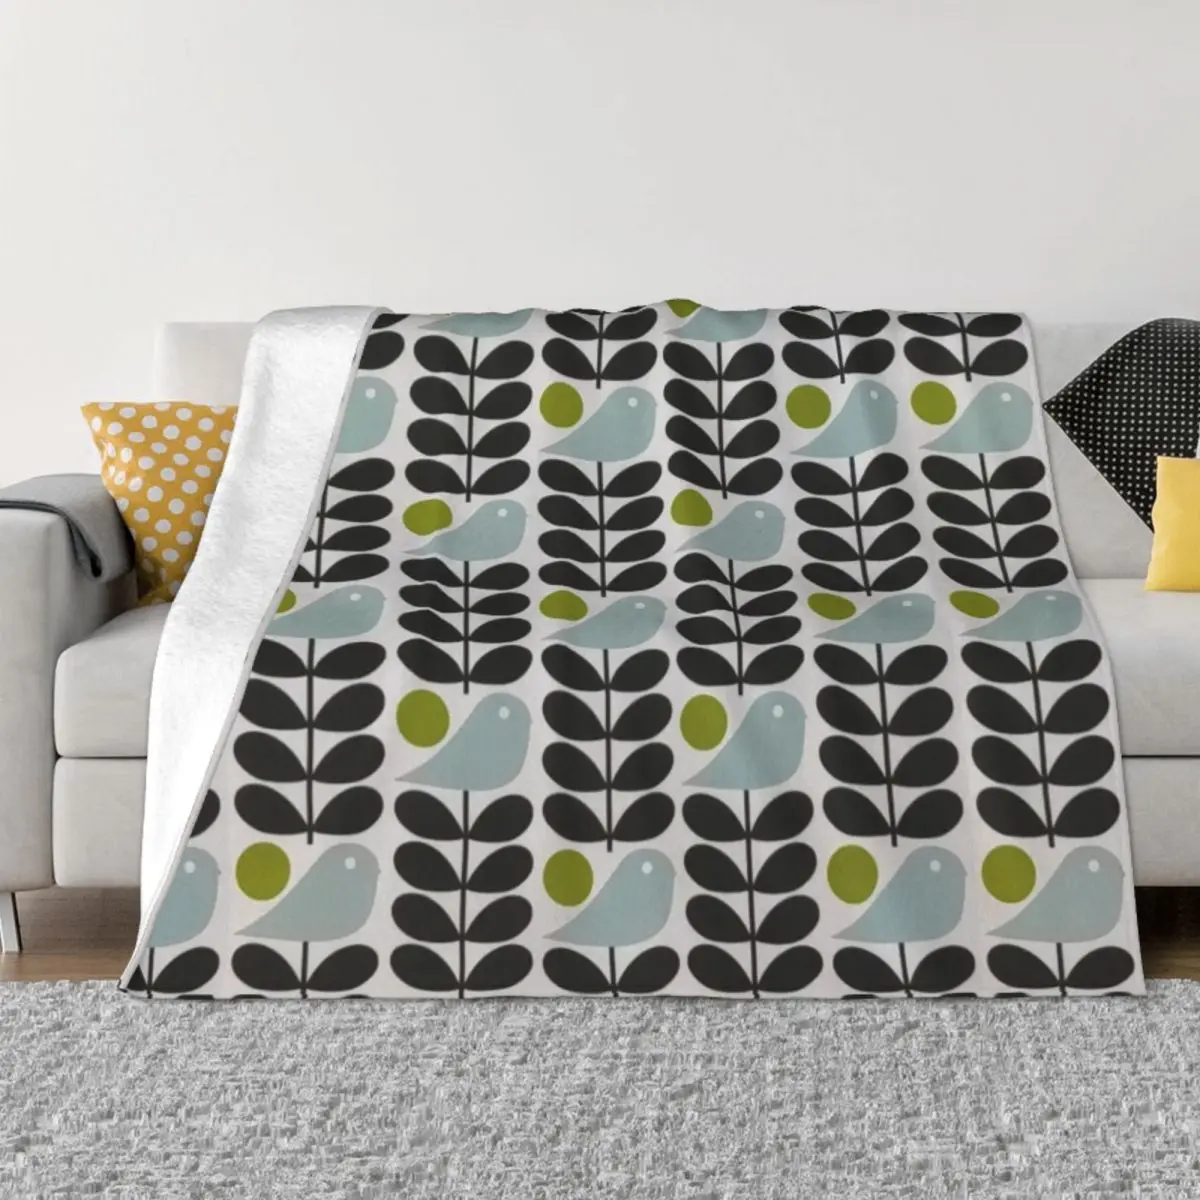 

Early Bird Granite Blankets Warm Flannel Orla Kiely Floral Throw Blanket for Bedding Couch Bedspread